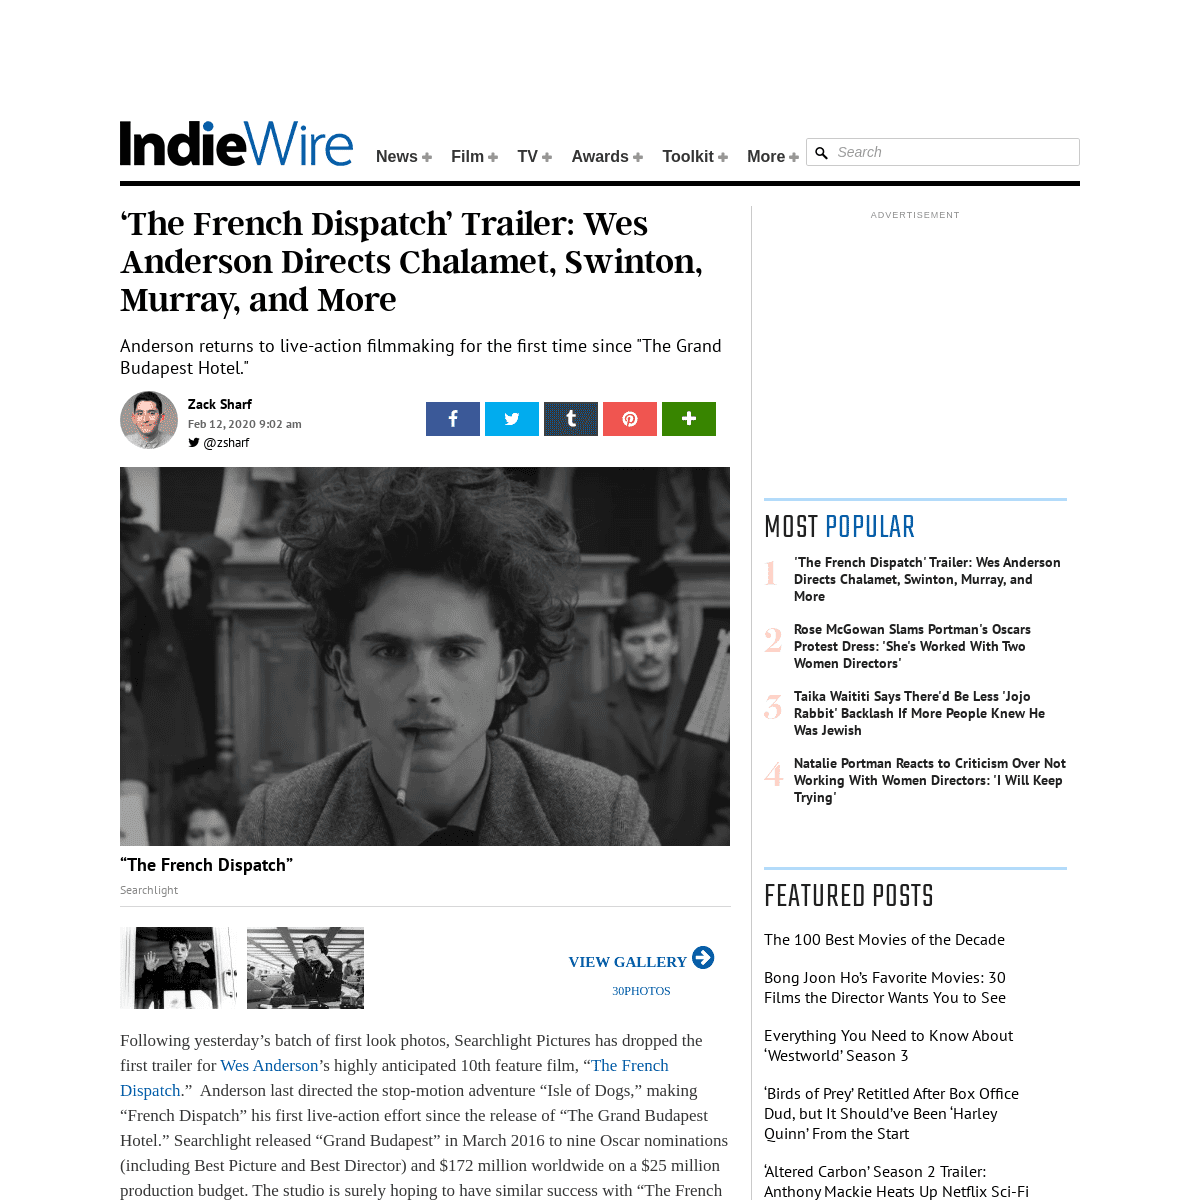 A complete backup of www.indiewire.com/2020/02/the-french-dispatch-trailer-wes-anderson-chalamet-1202210769/